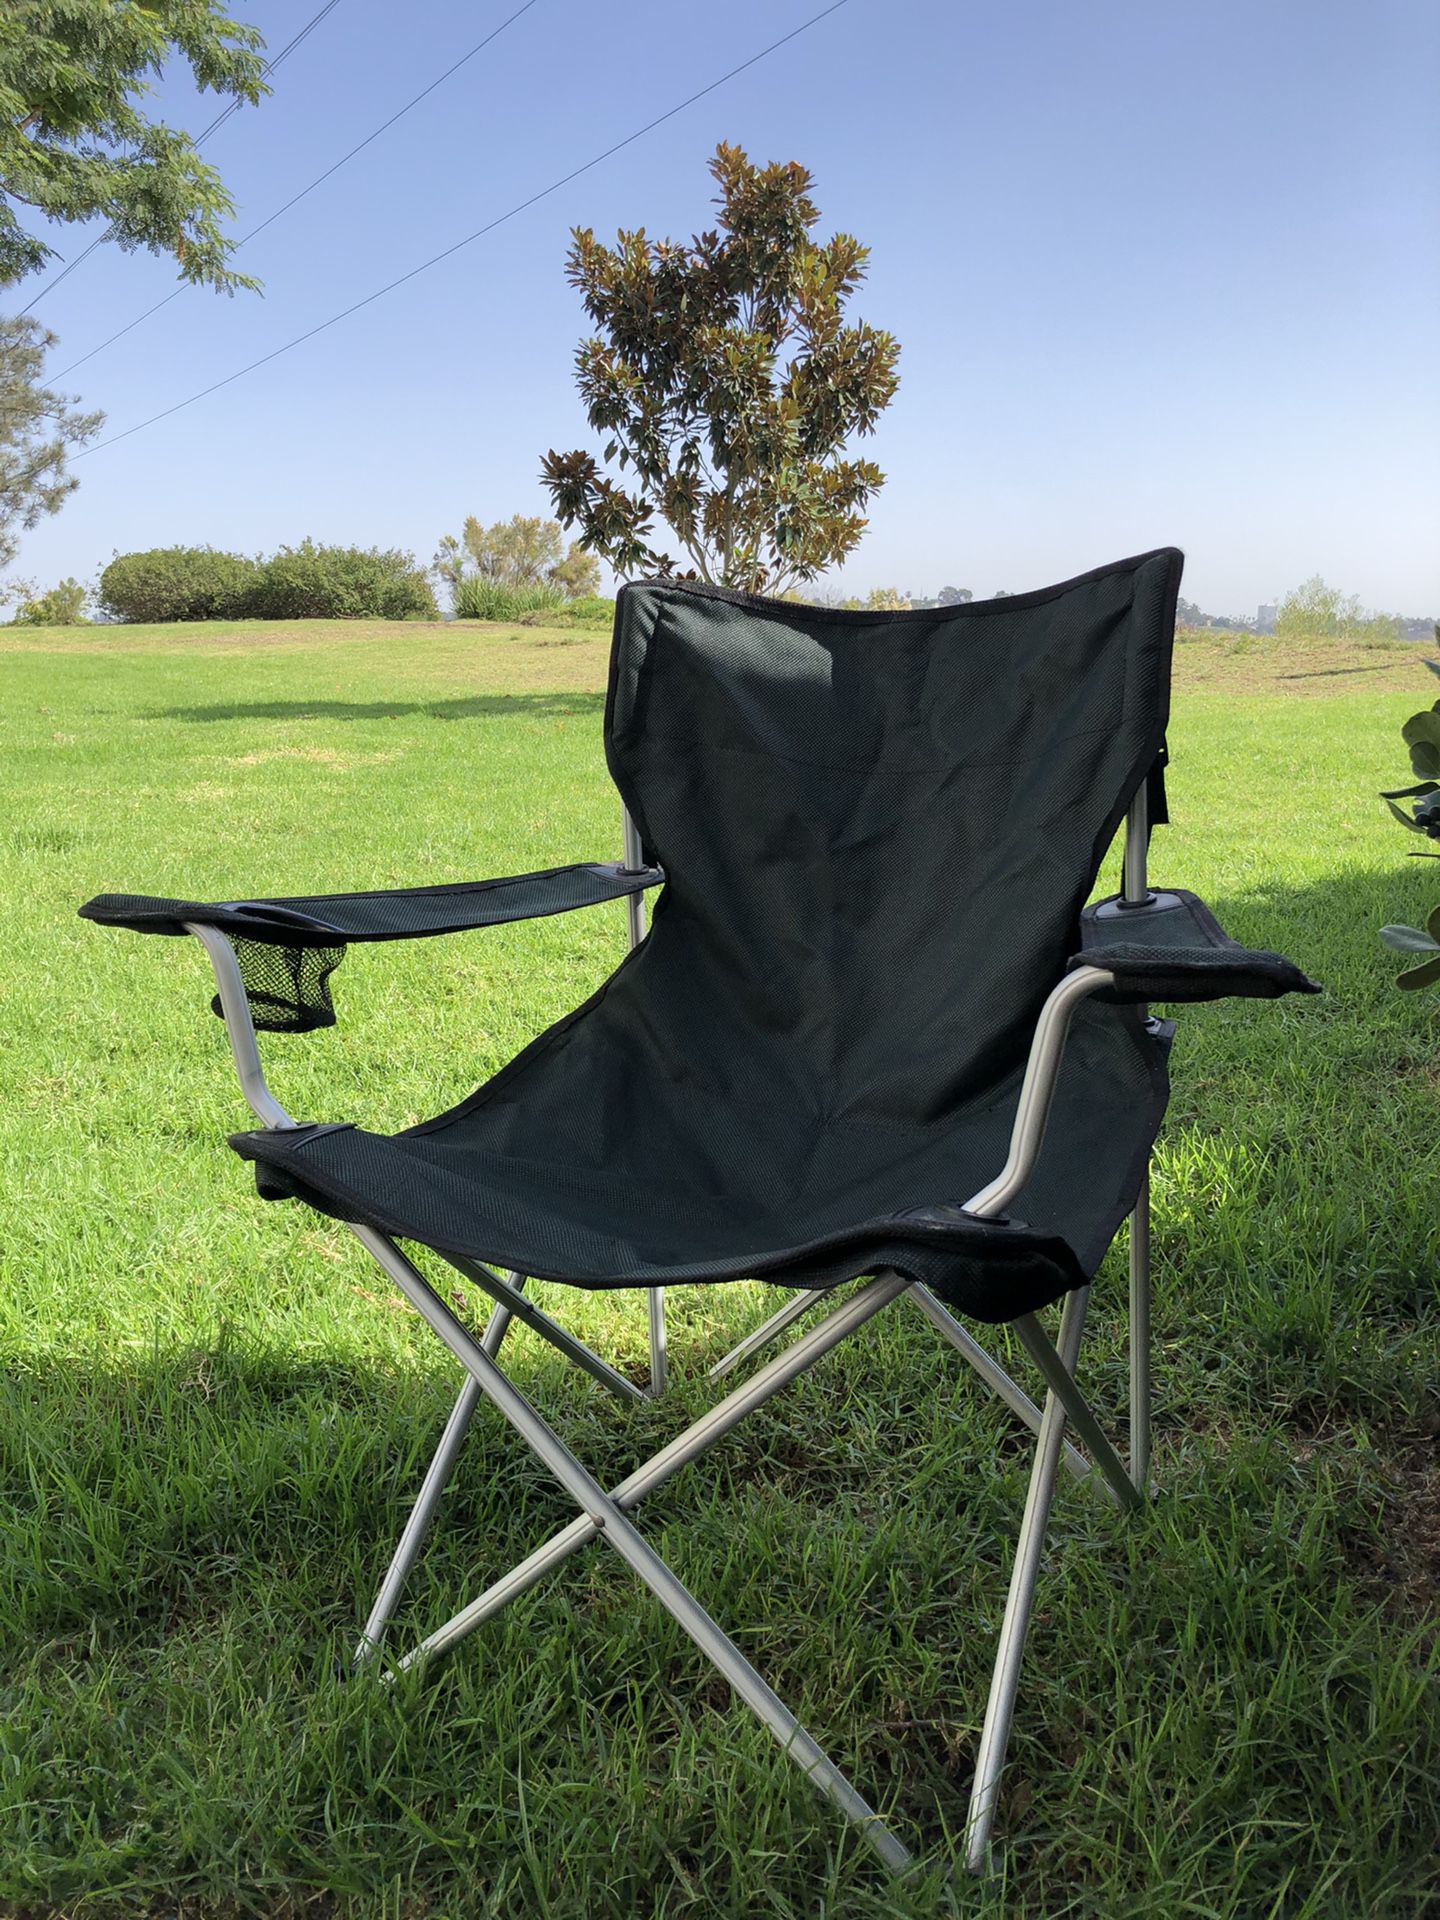 Travel chair - camping chair